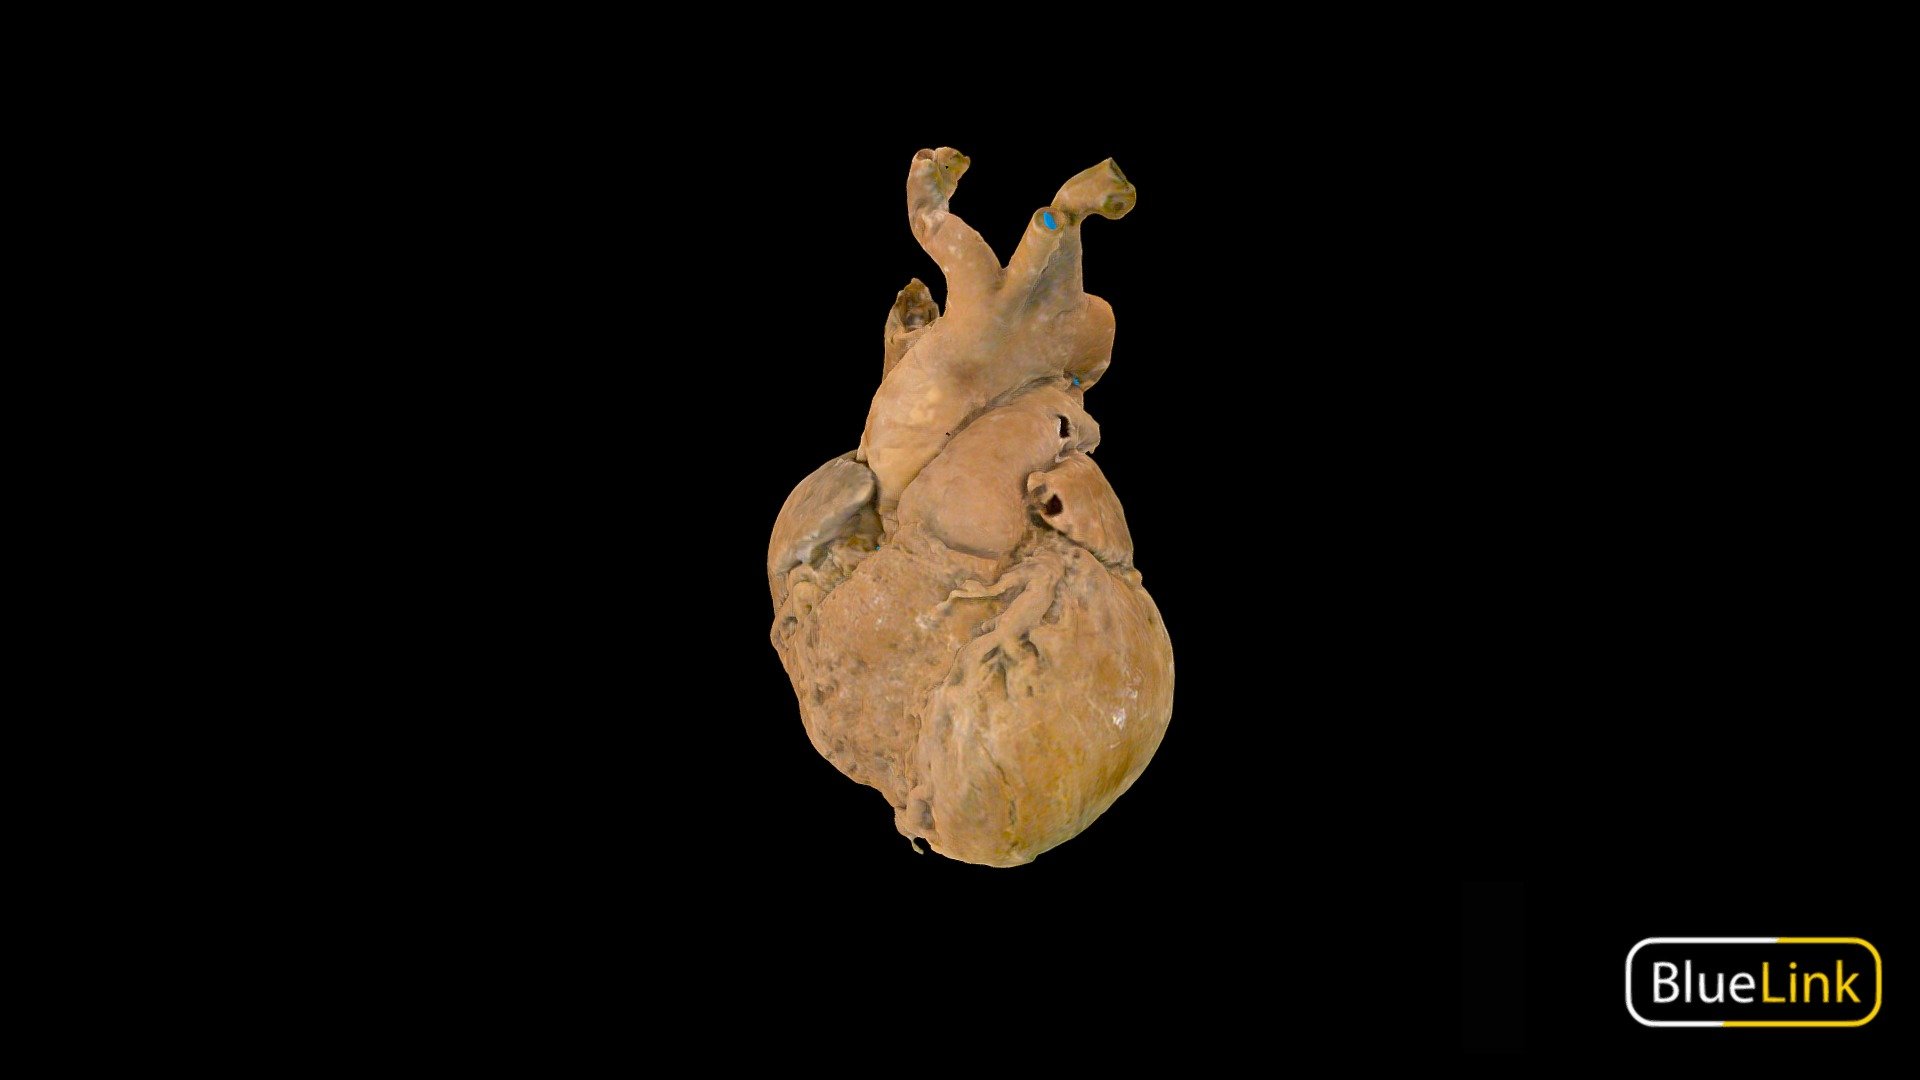 3D scan of a plastinated heart

Captured with Einscan Pro

Captured and edited by: Madelyn Murphy, Will Gribbin, Cristina Prall

Copyright 2019 BK Alsup &amp; GM Fox - Arch of the Aorta - 3D model by Bluelink Anatomy - University of Michigan (@bluelinkanatomy) 3d model